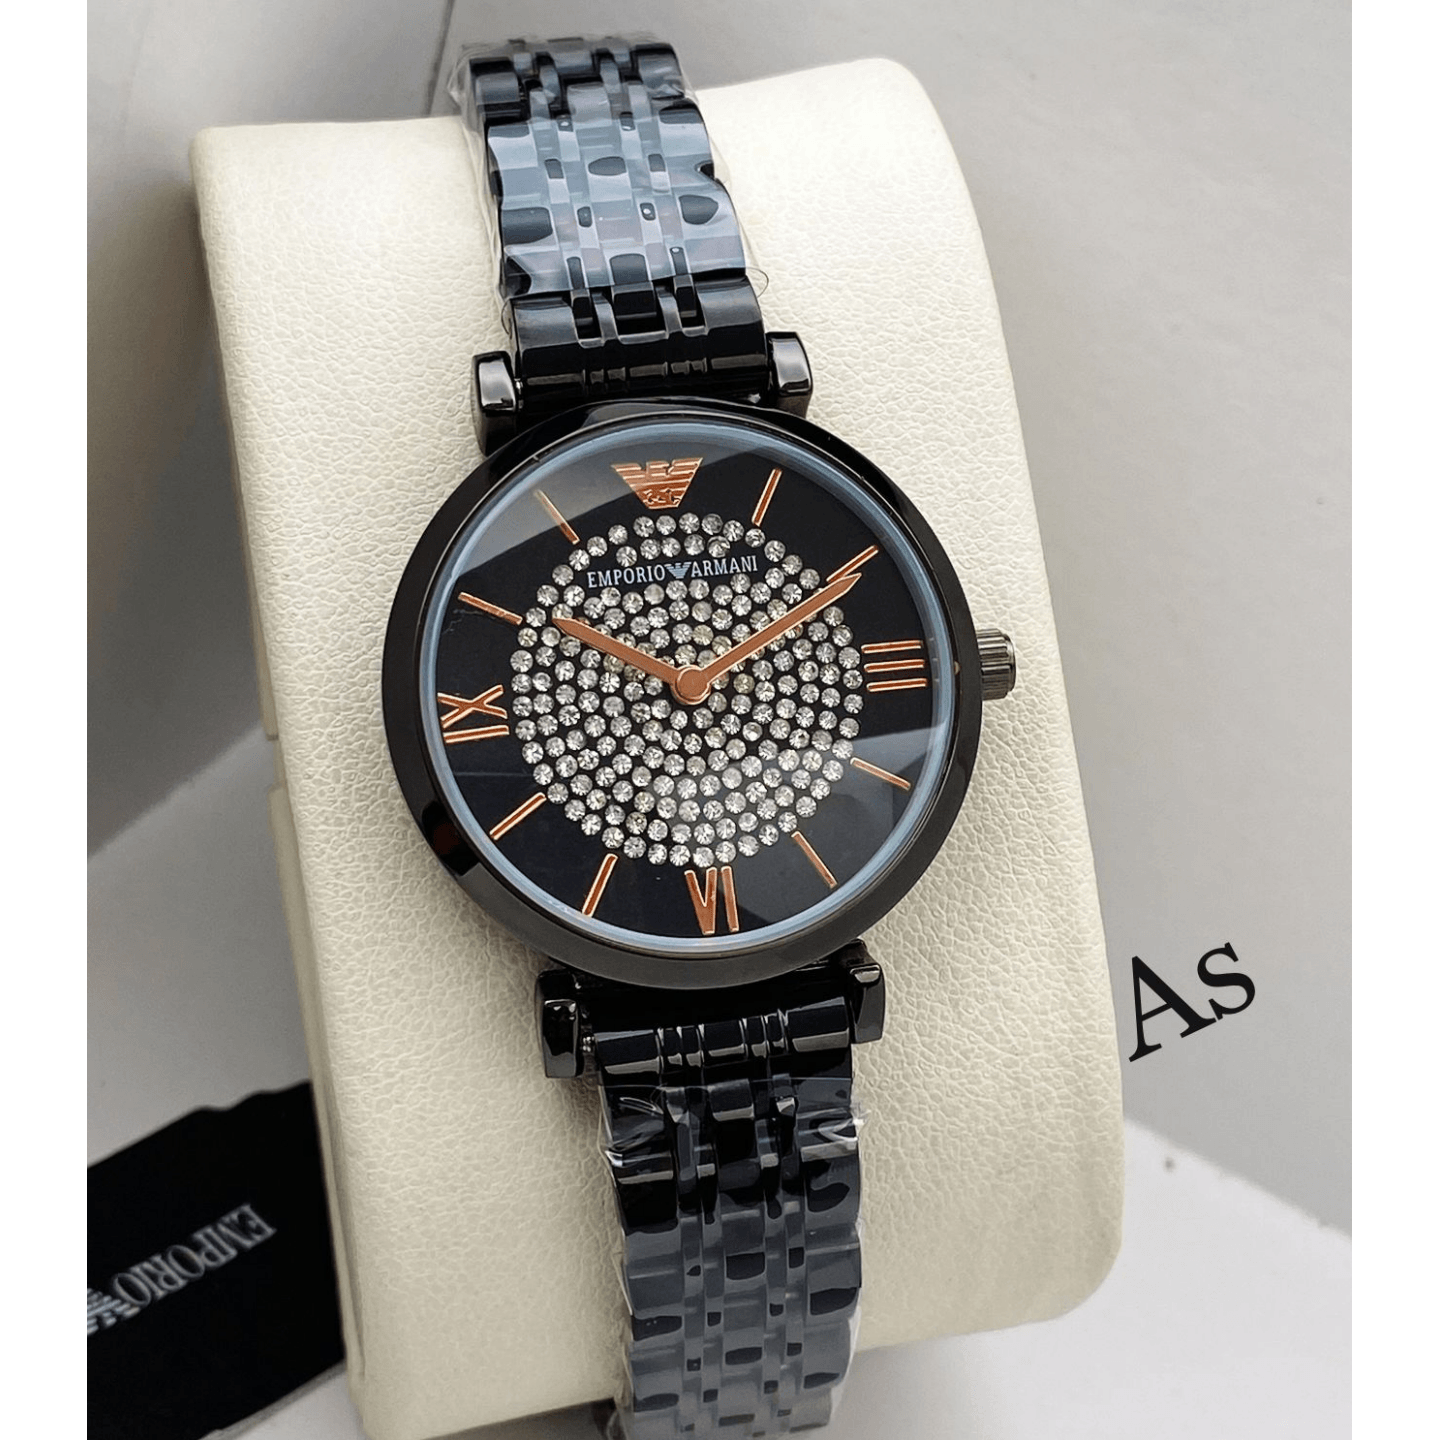 Ladies Black Belt Black Dial Armani Watch Gift  Engagement, anniversary, valentines day, mothers day for sister, wife,friend,mother, baby shower